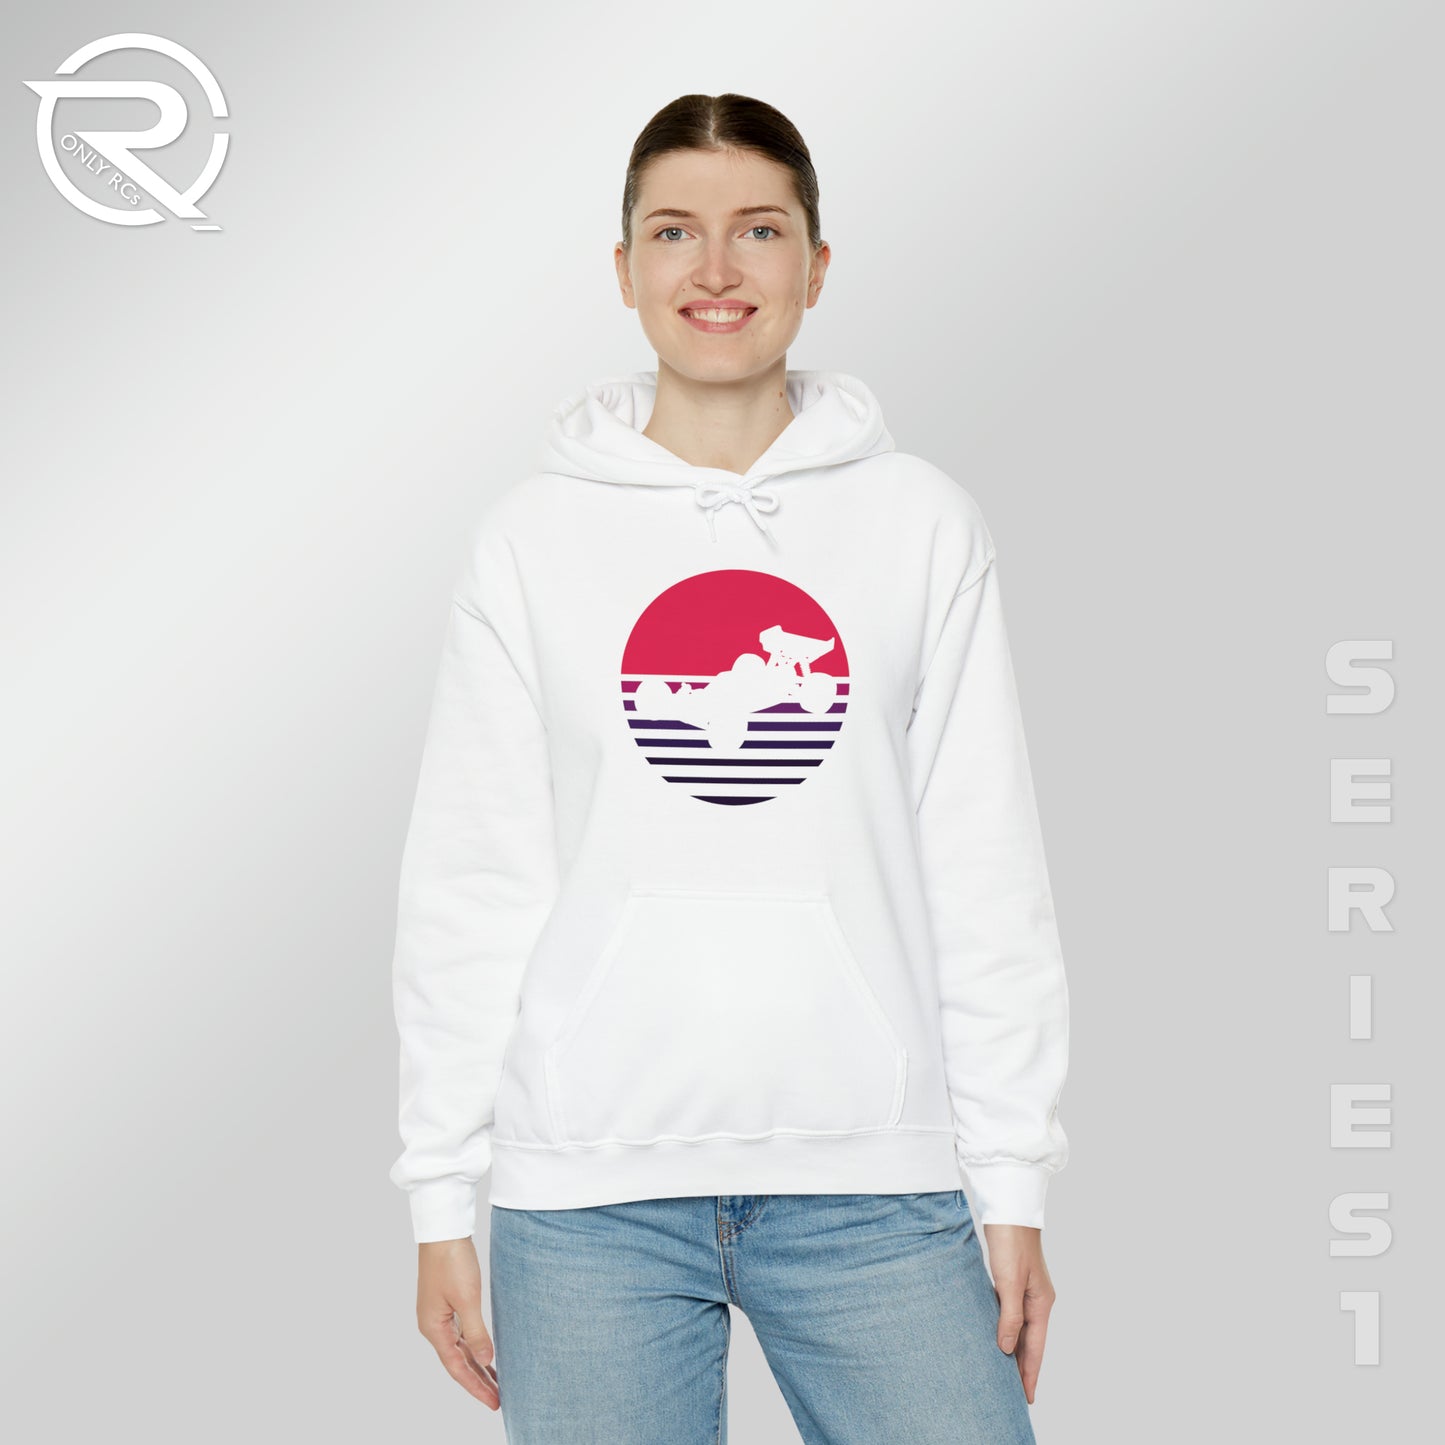 OnlyRCs - Sunset Fade Buggy Pink to Purple Silhouette Unisex Heavy Blend™ Hooded Sweatshirt - Series 1